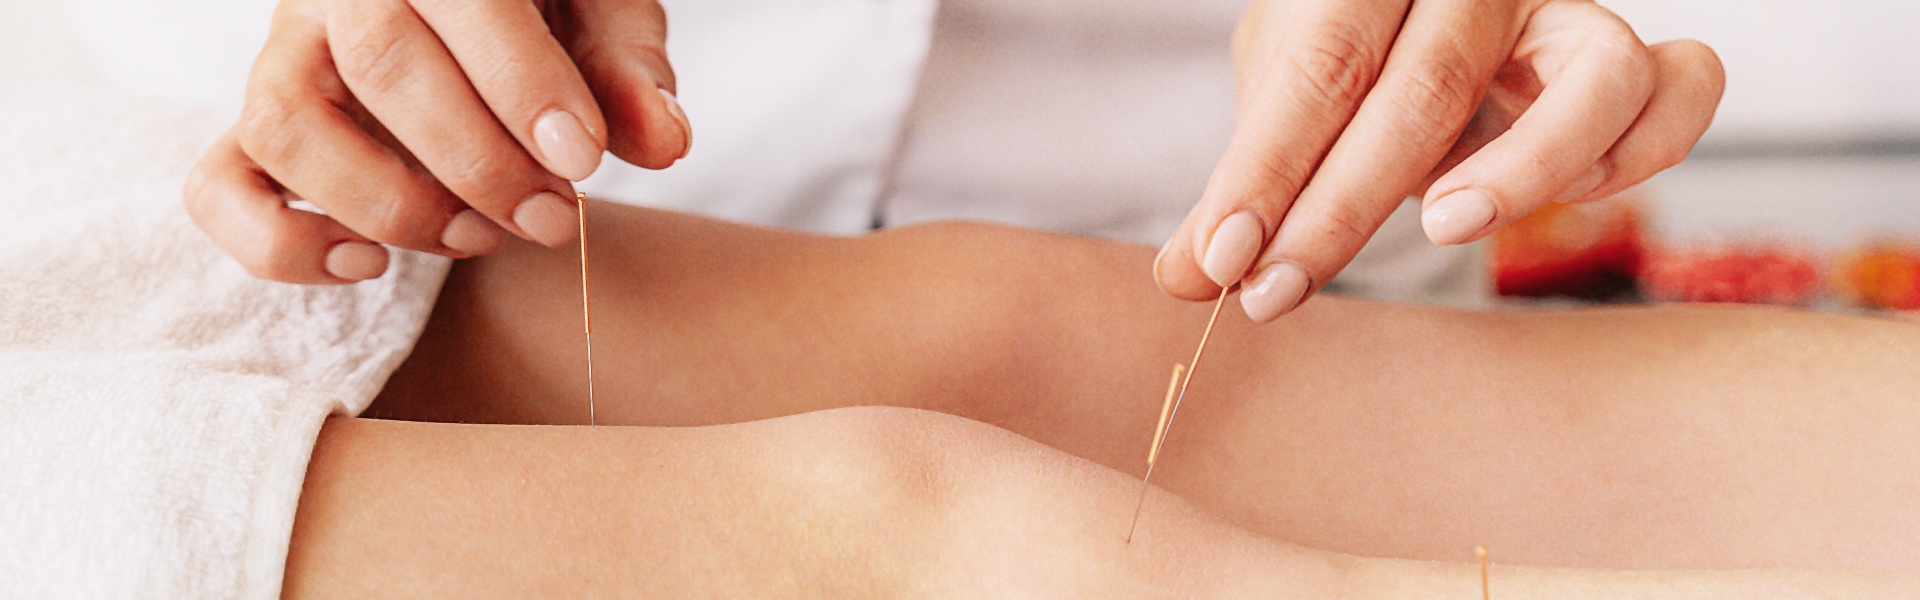 Example of dry needling with acupuncture at Holmwood Clinic